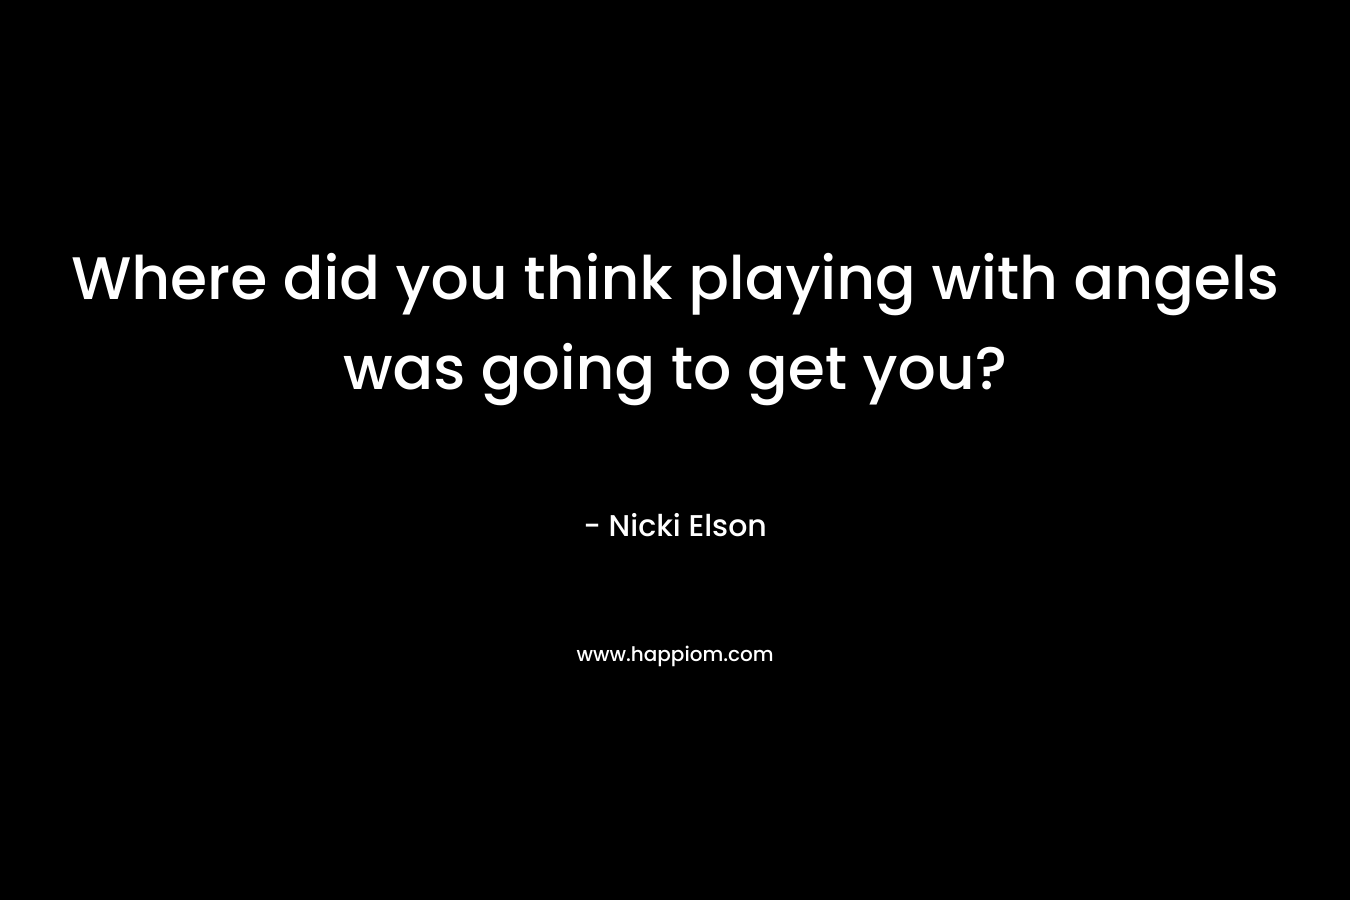 Where did you think playing with angels was going to get you? – Nicki Elson